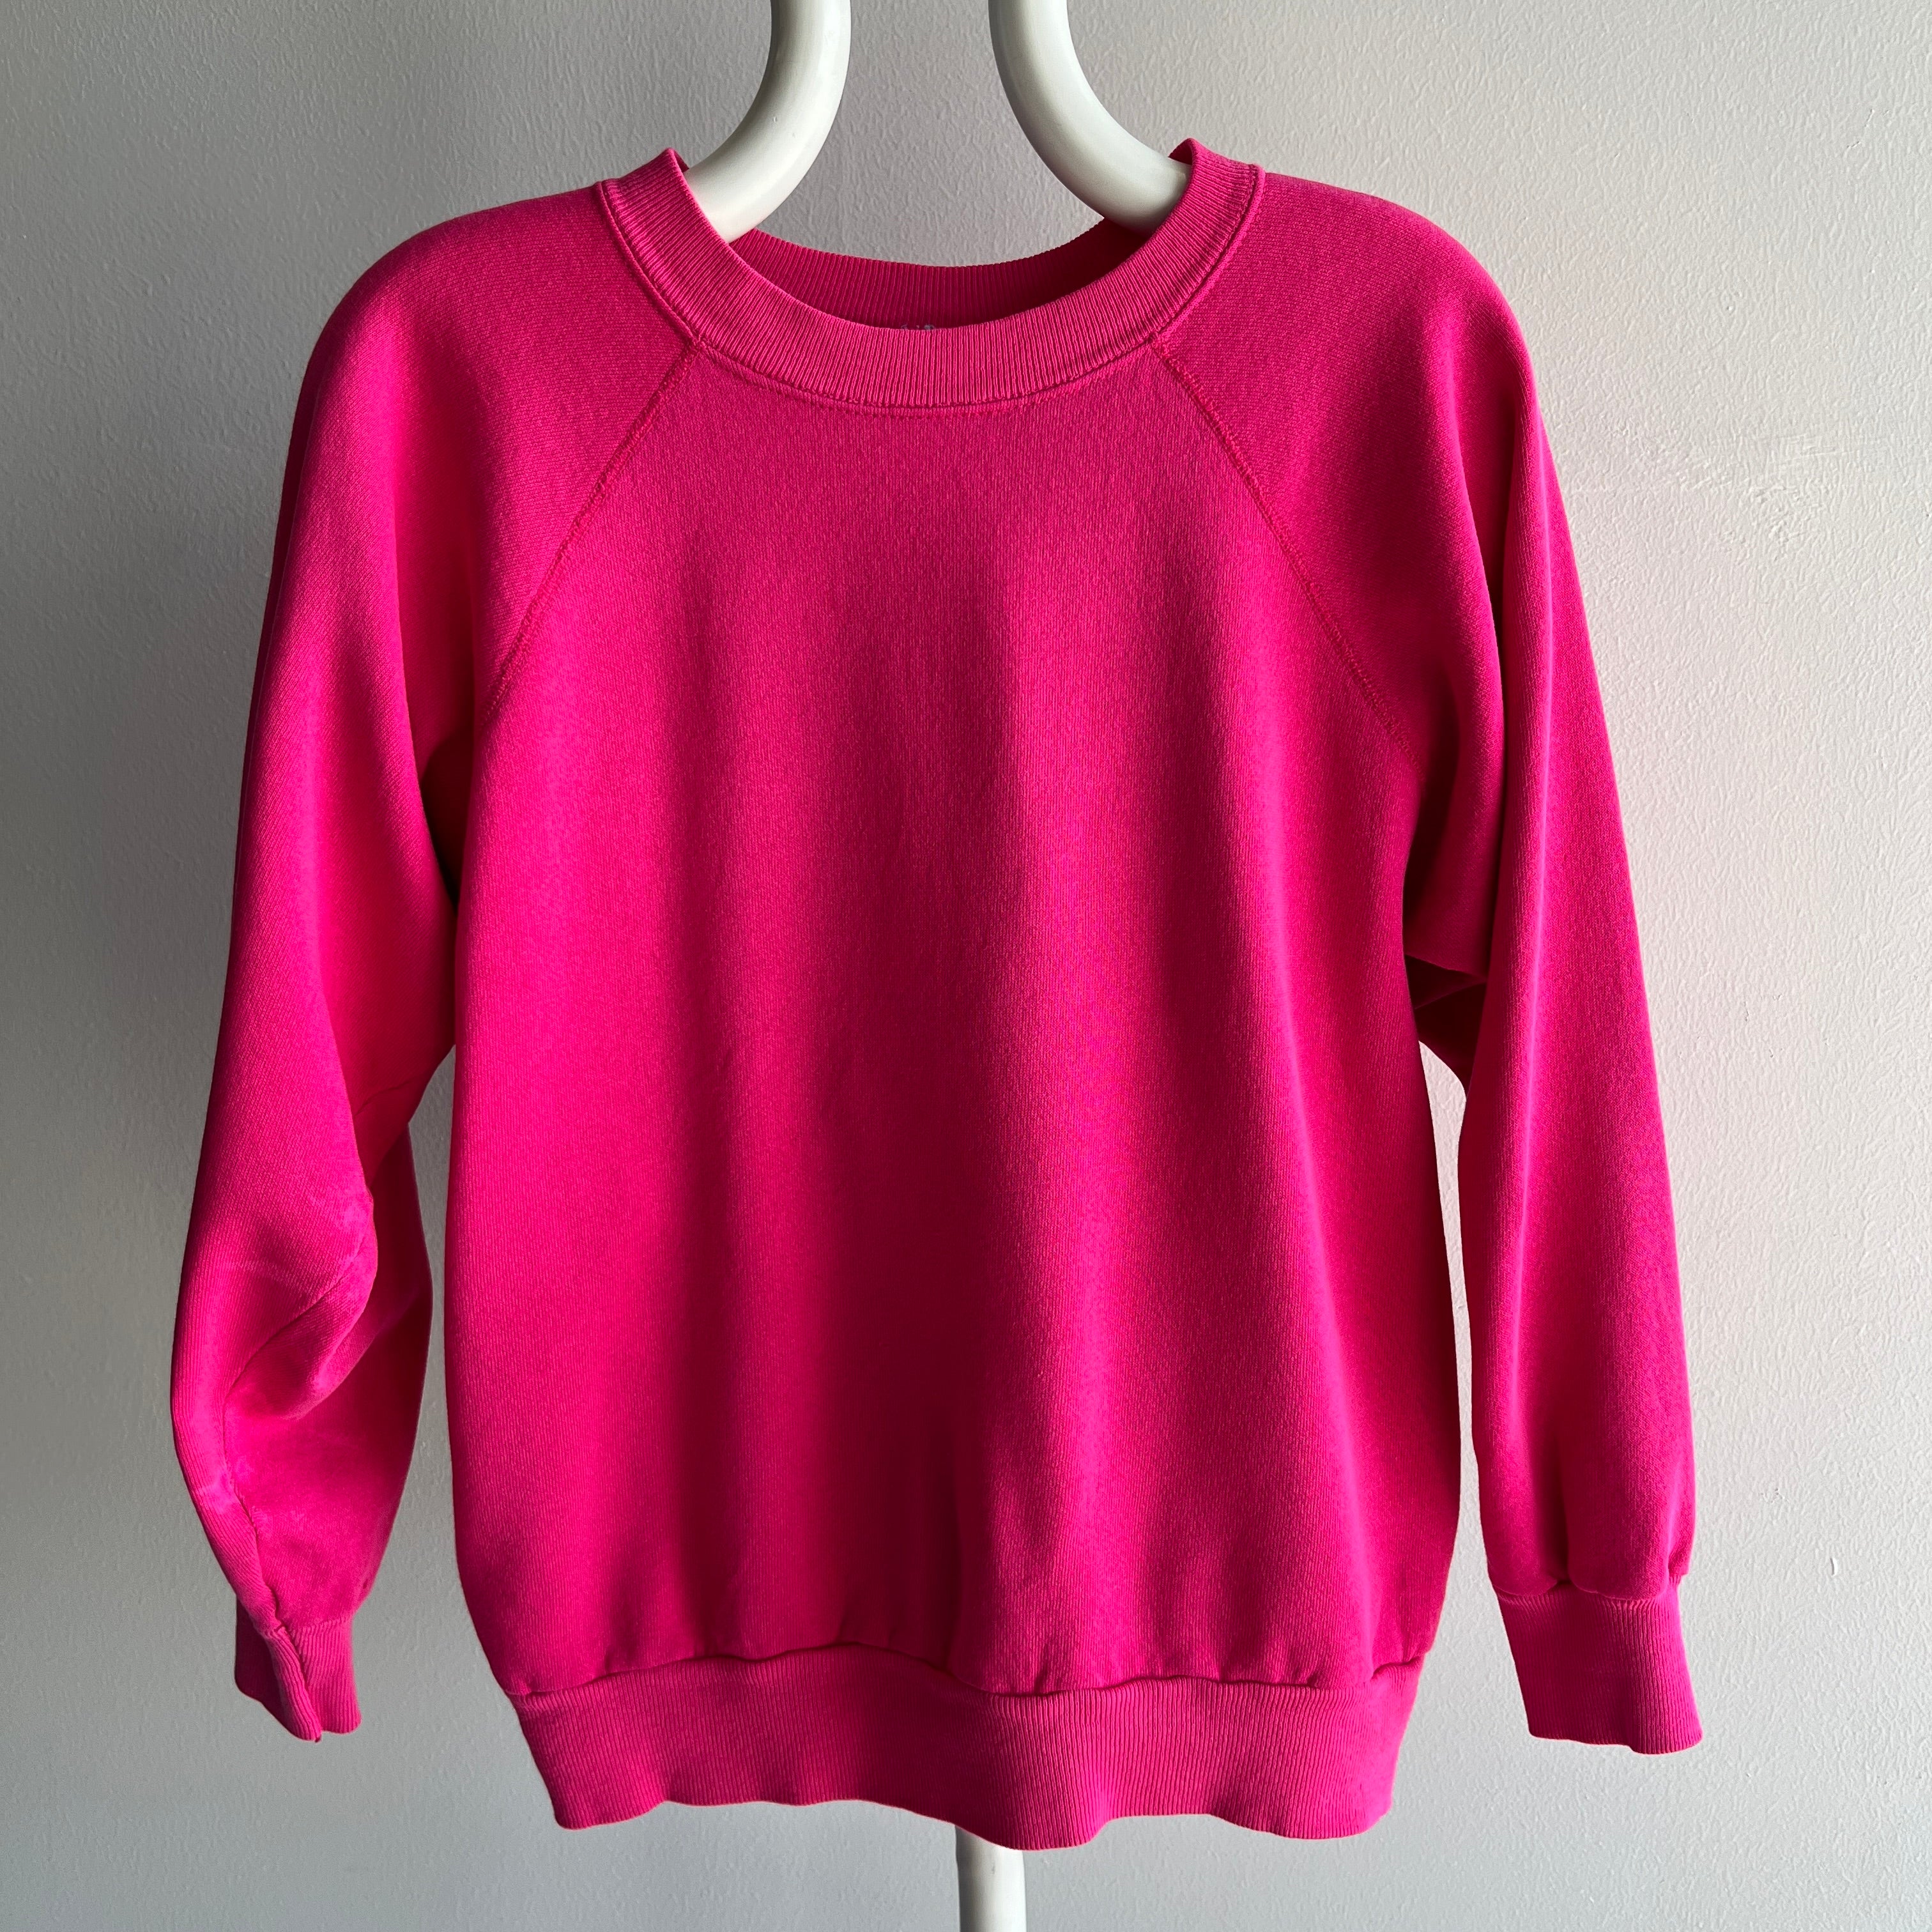 1980s Thin and Slouchy Hot Pink Sweatshirt with Bleach Staining on the Sleeve